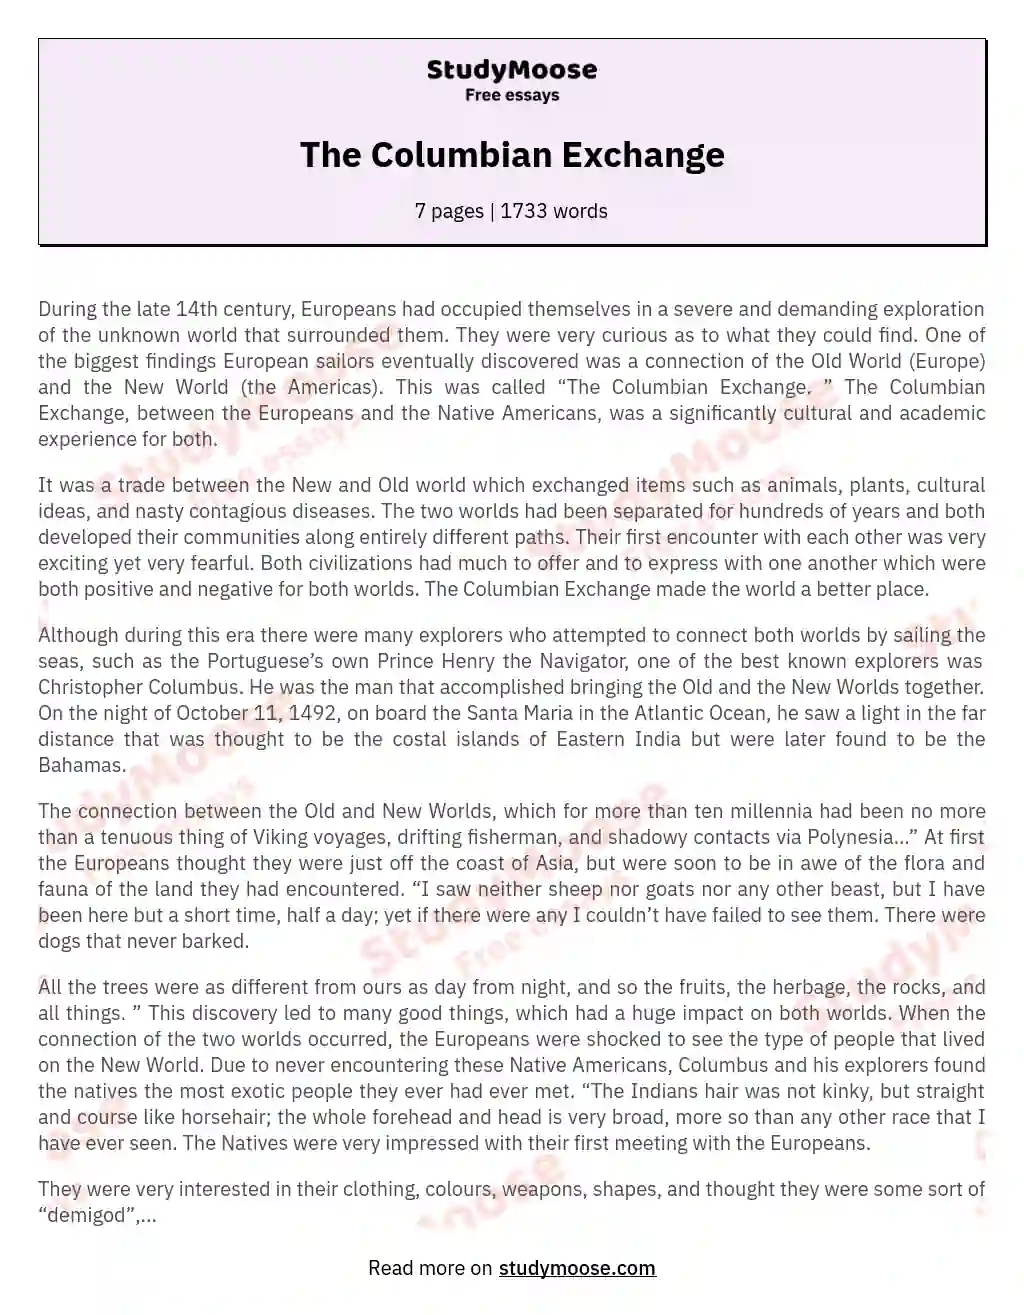 The Columbian Exchange: A Transformative Encounter Between Old and New Worlds essay